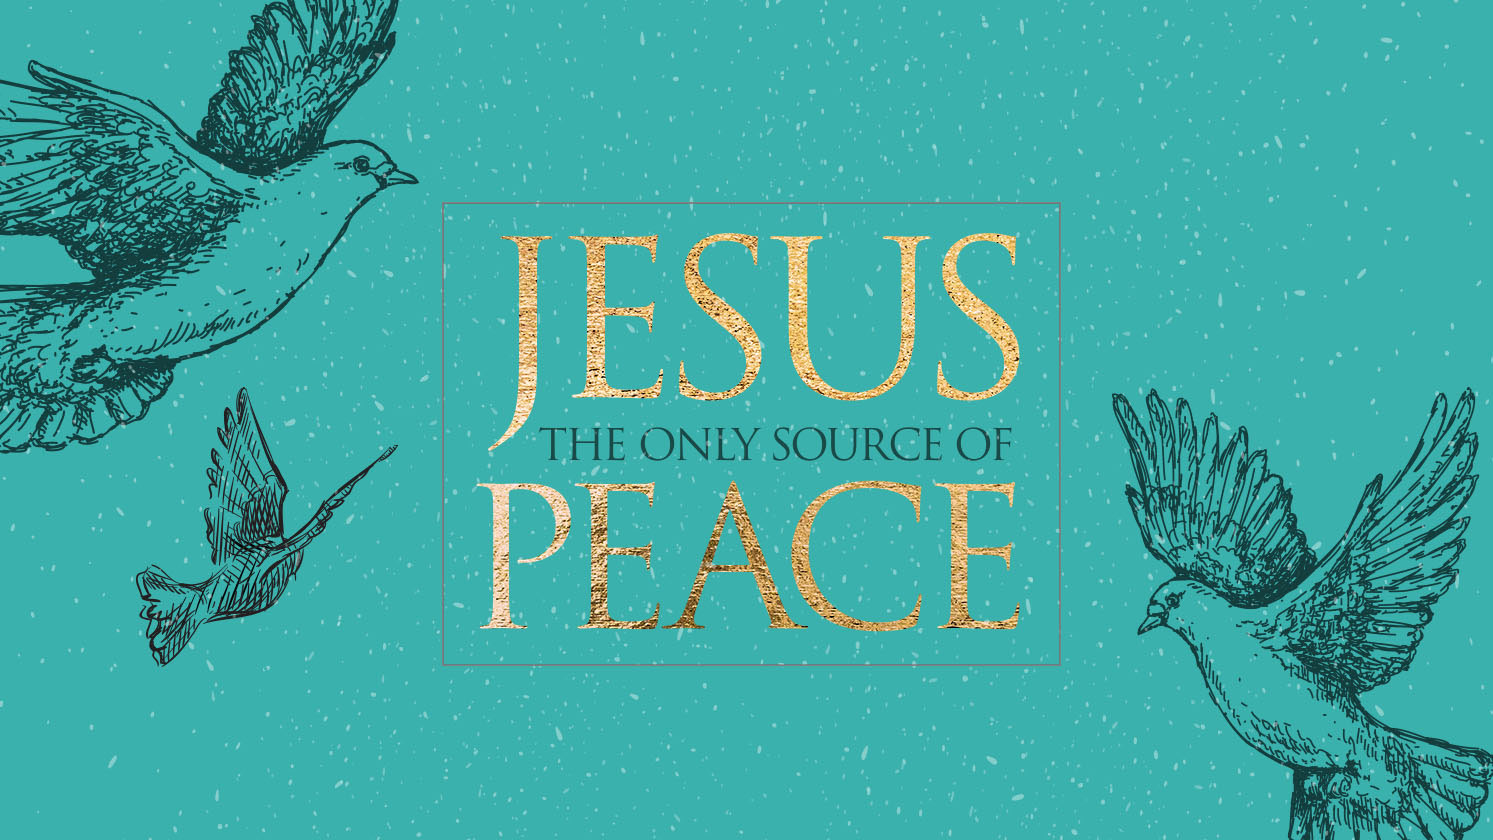 Jesus - The Only Source of Peace